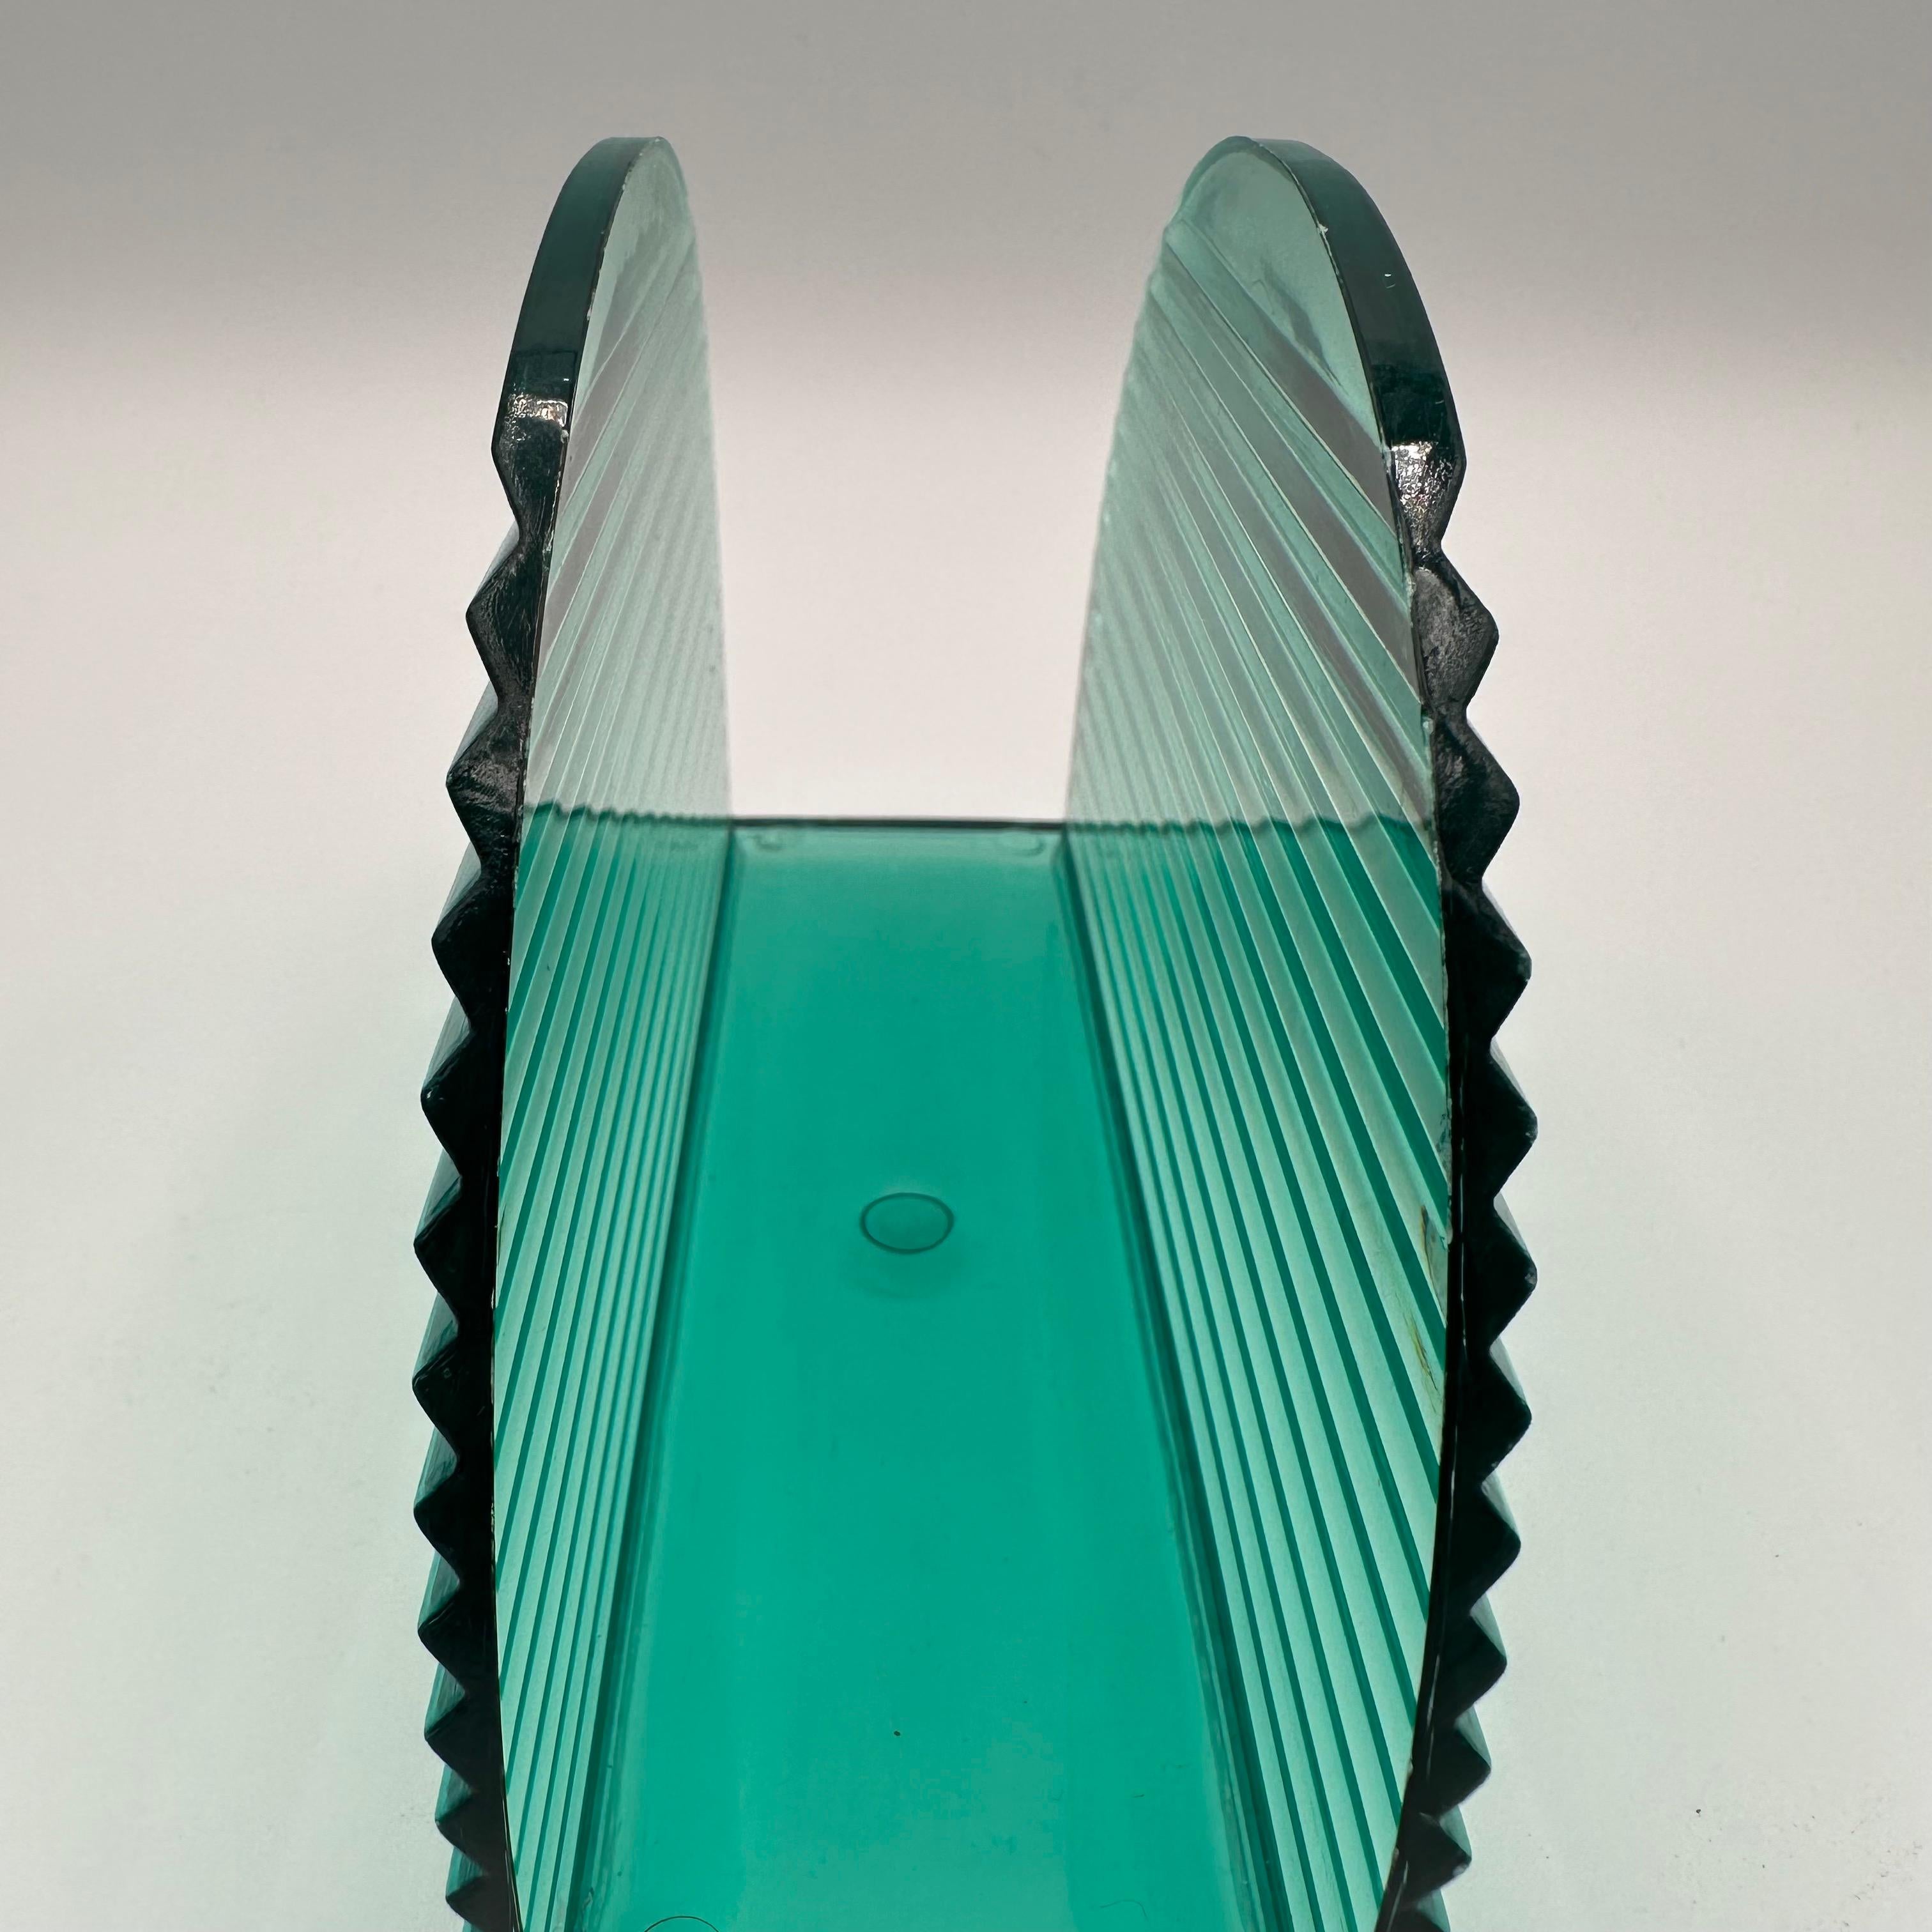 Vintage Post Modern Half Moon Shaped Teal Lucite Napkin Holder In Good Condition For Sale In Amityville, NY